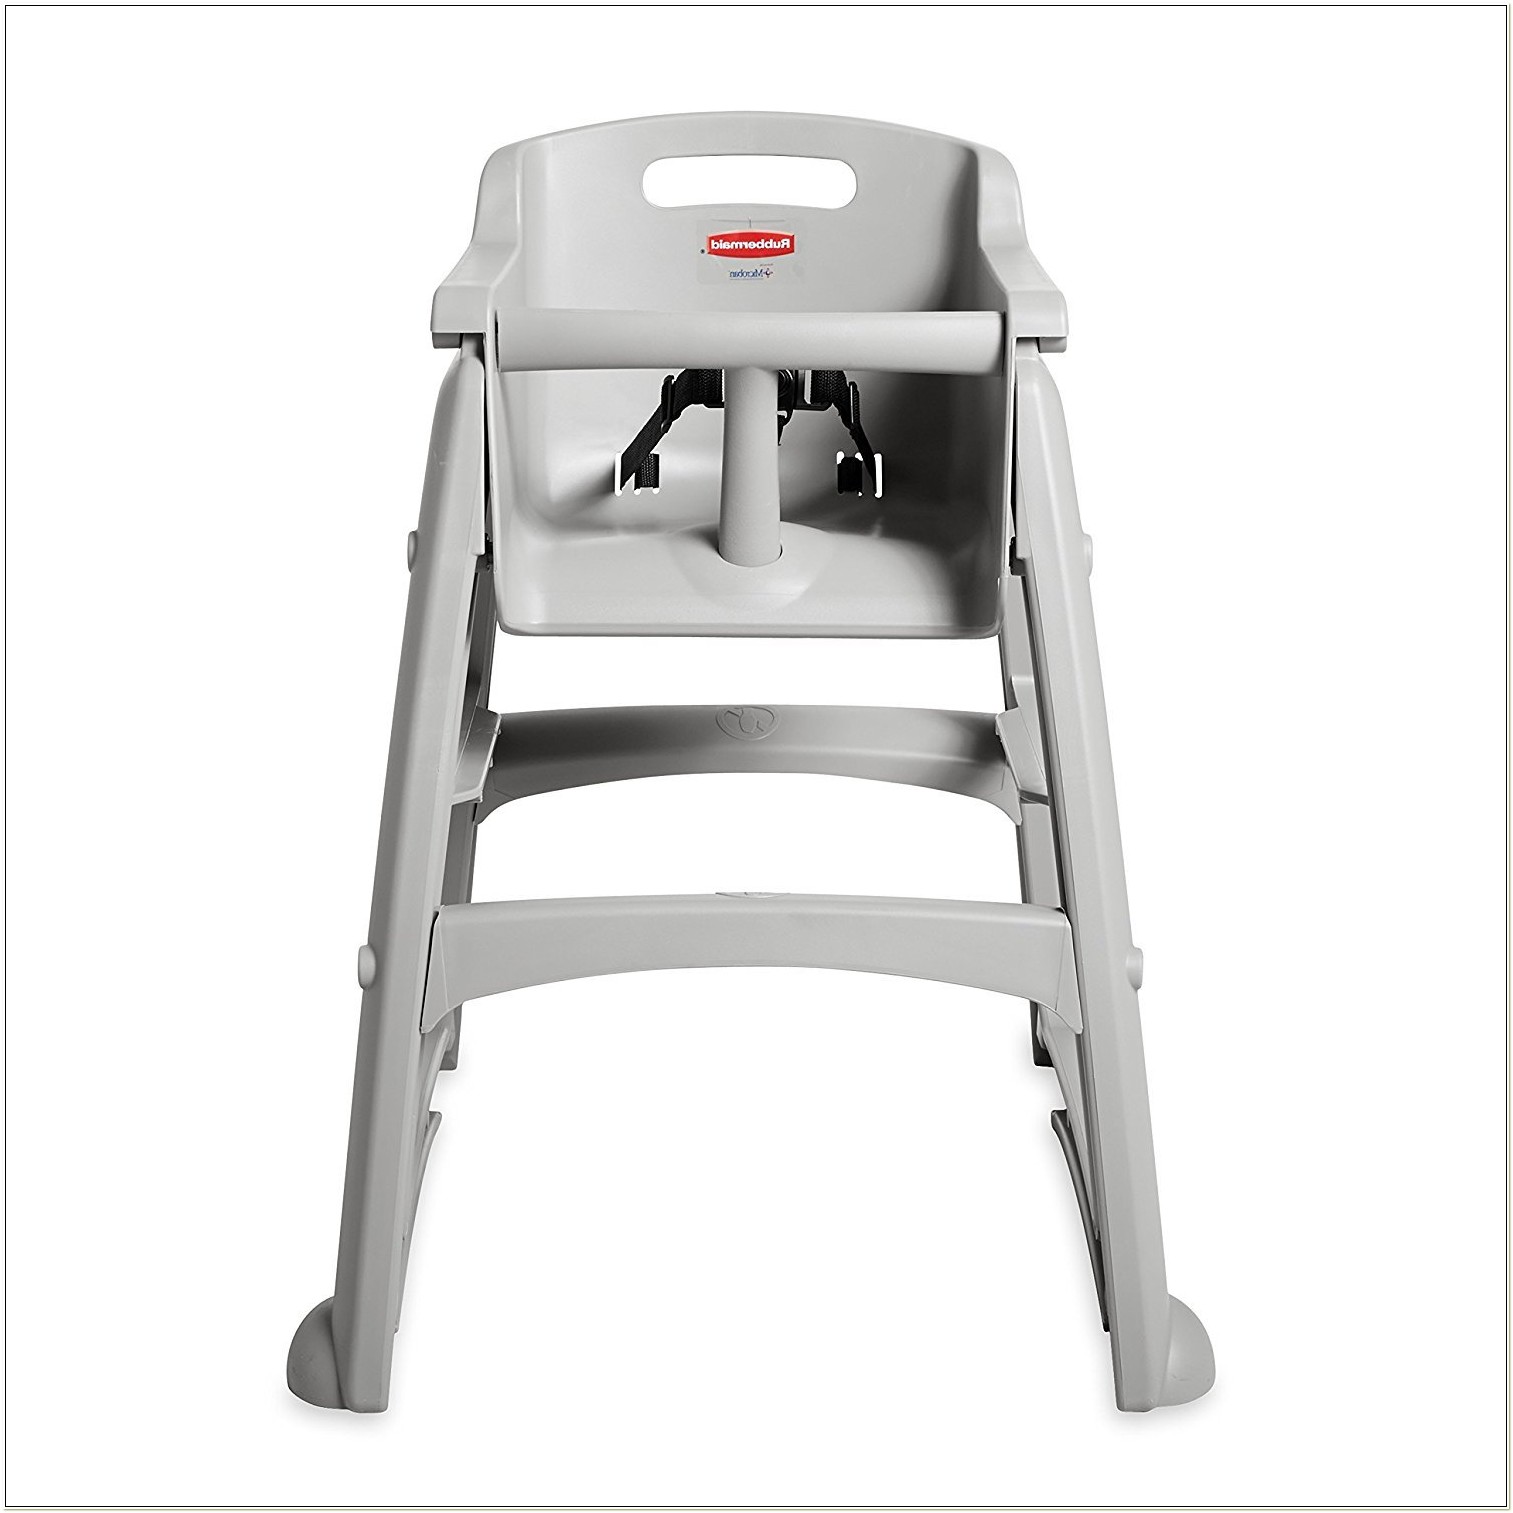 Rubbermaid Commercial High Chair With Wheels - Chairs : Home Decorating